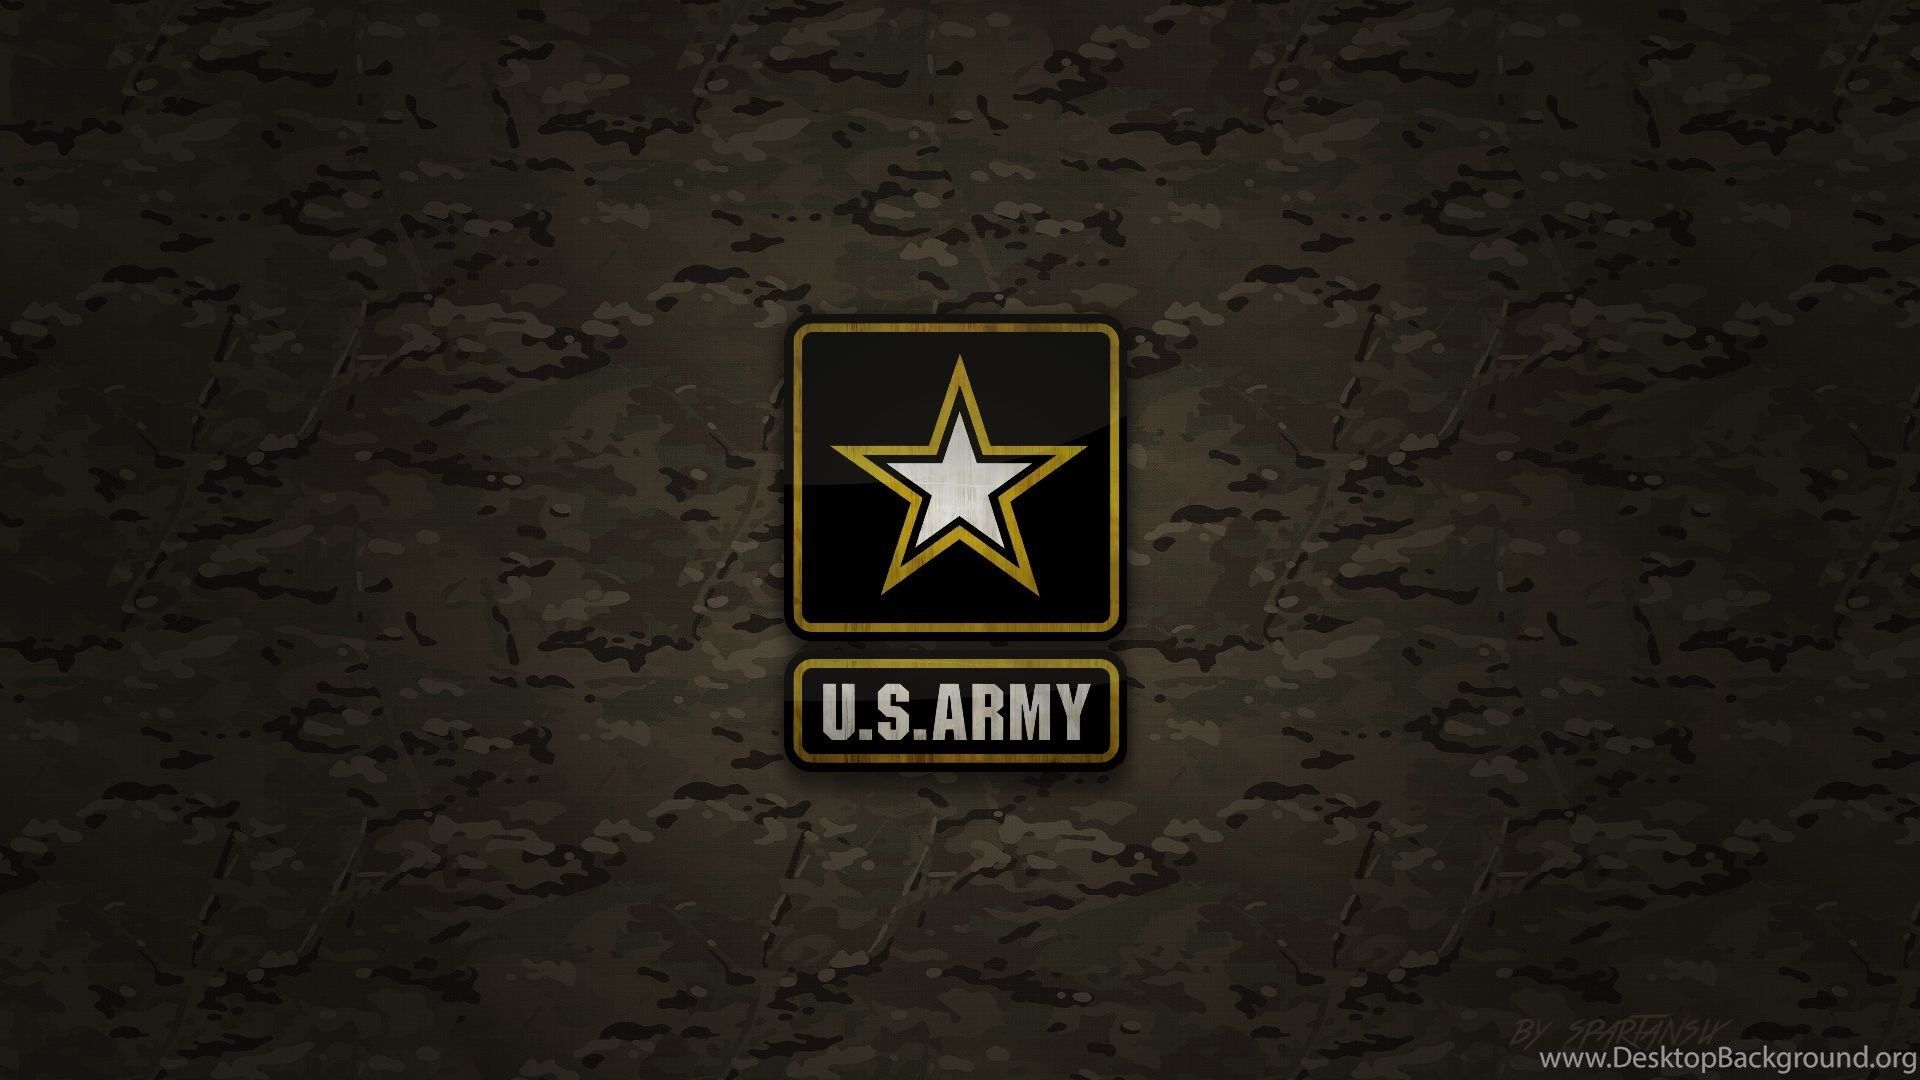 More Like US Army Multicam Wallpaper By SpartanSix By. Desktop Background